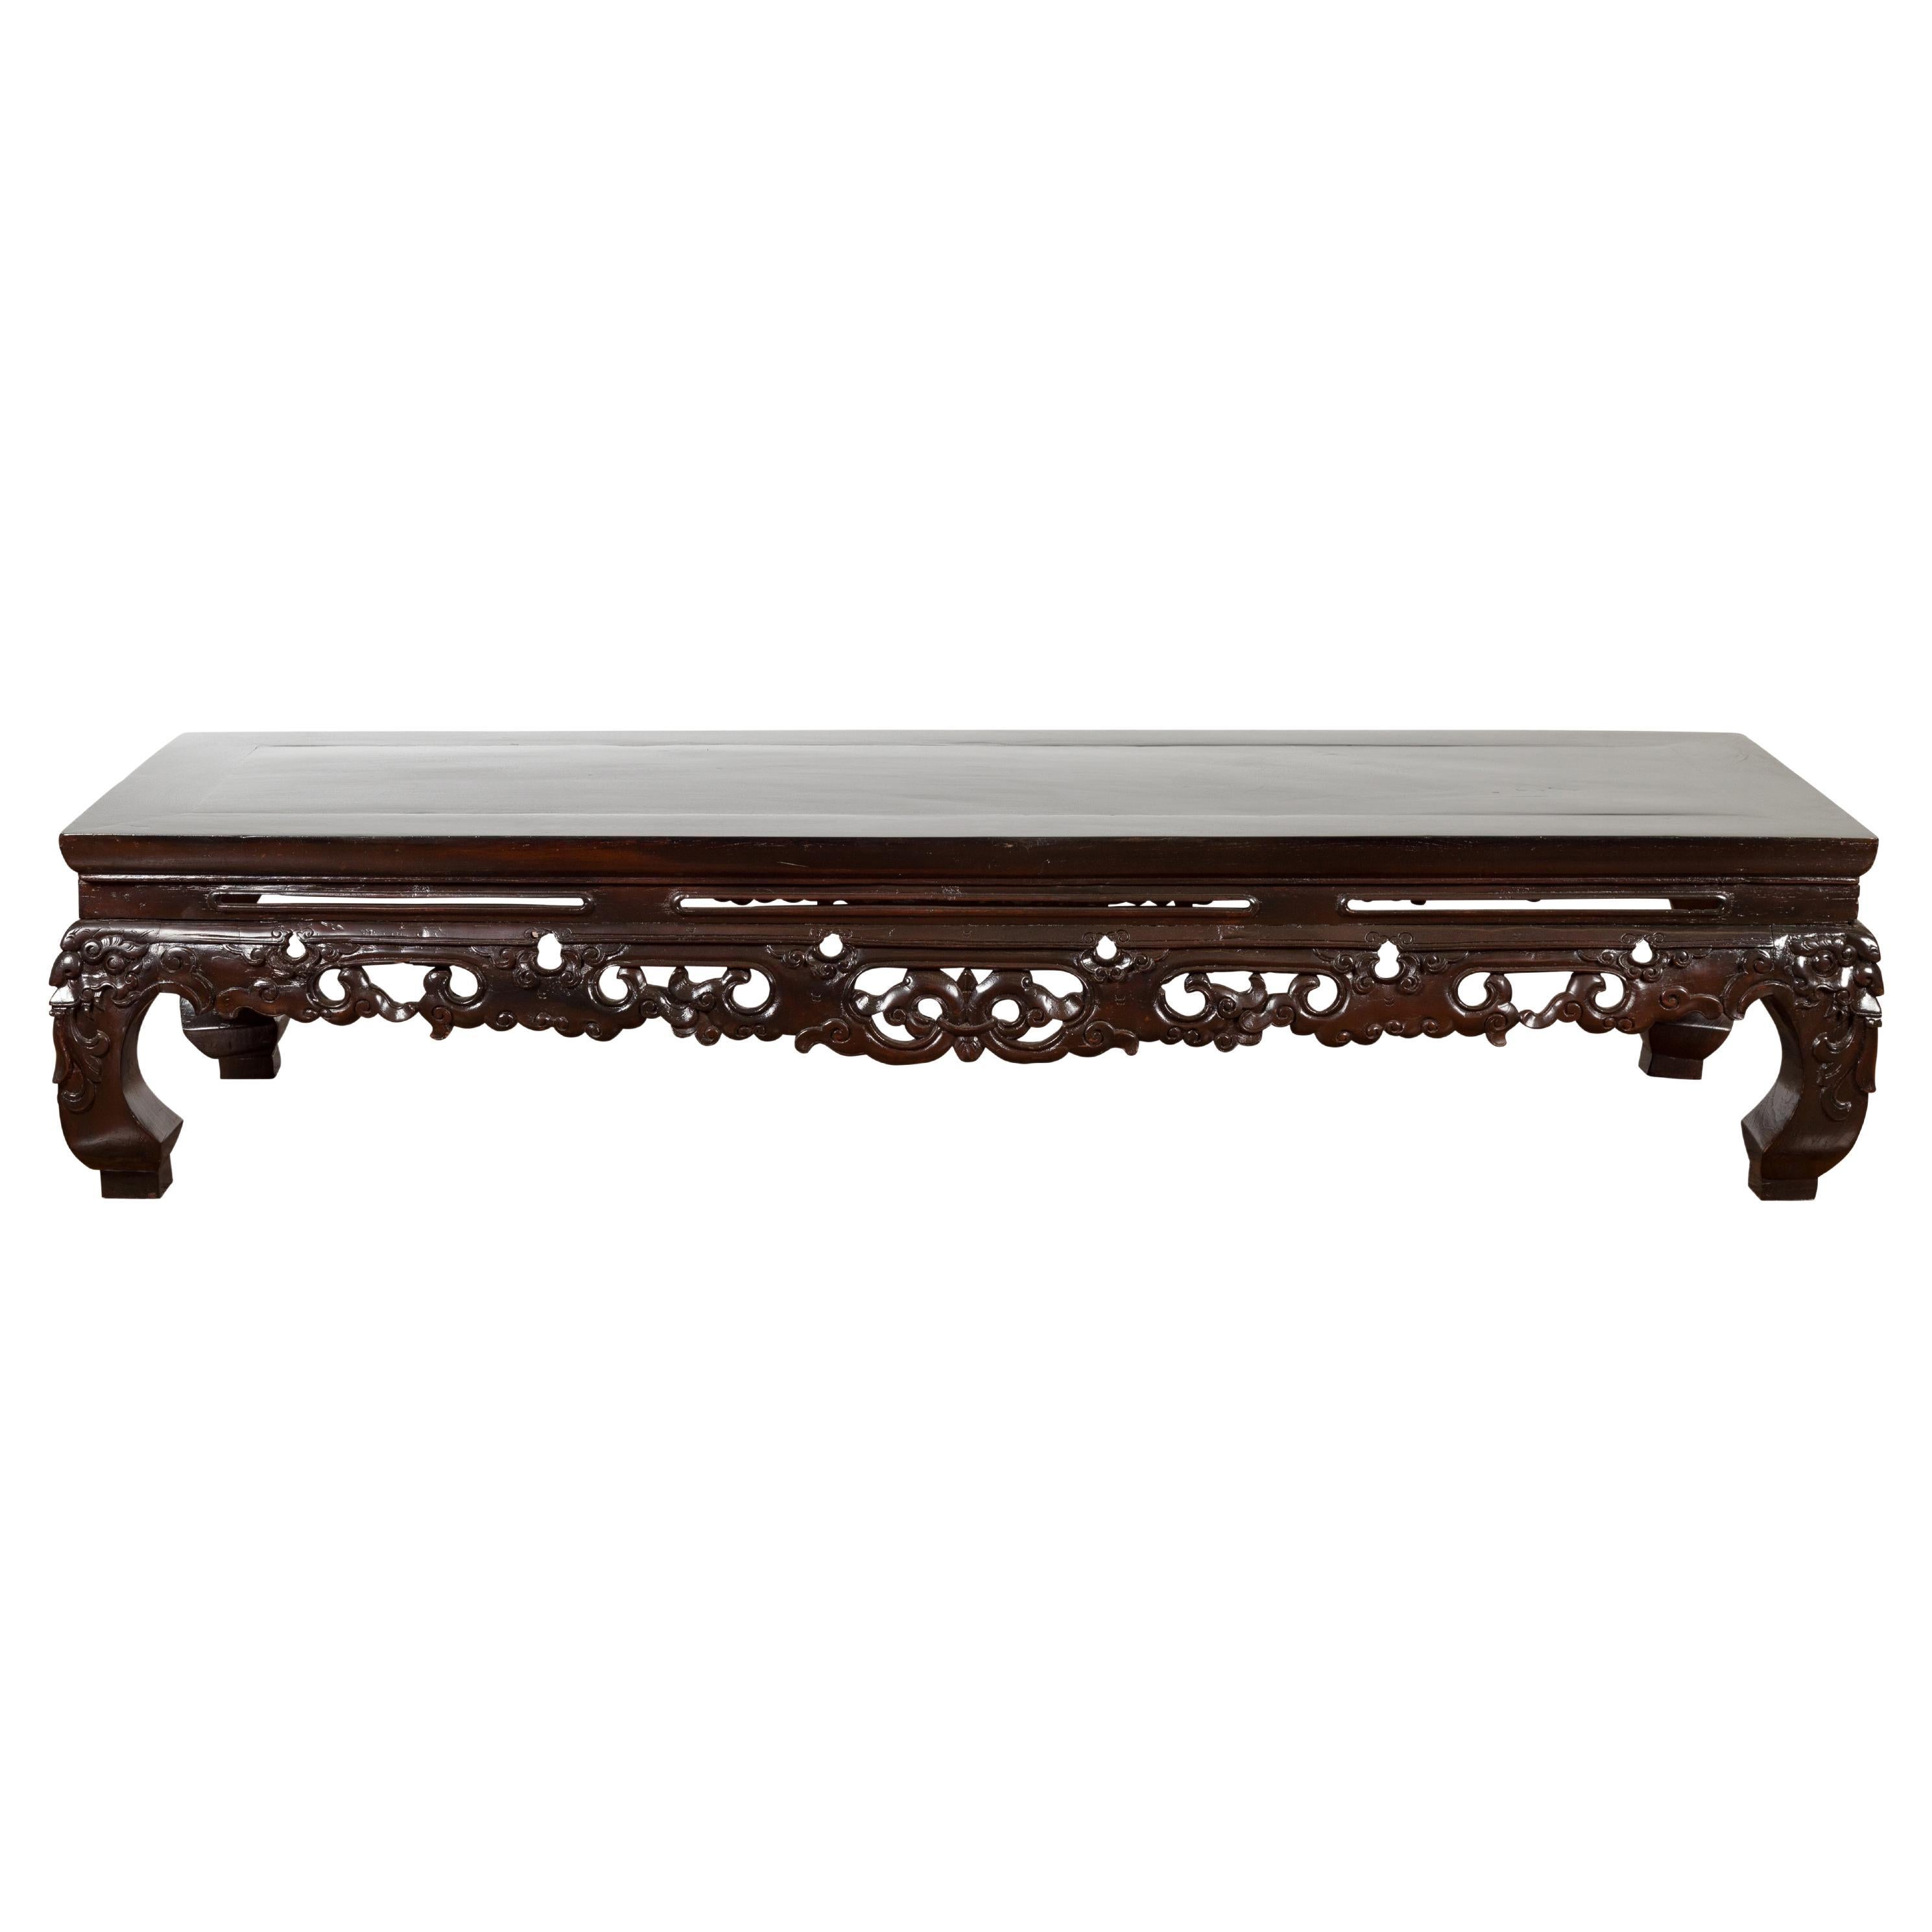 Chinese Qing Dynasty Low Kang Coffee Table with Carved Apron and Dark Lacquer For Sale